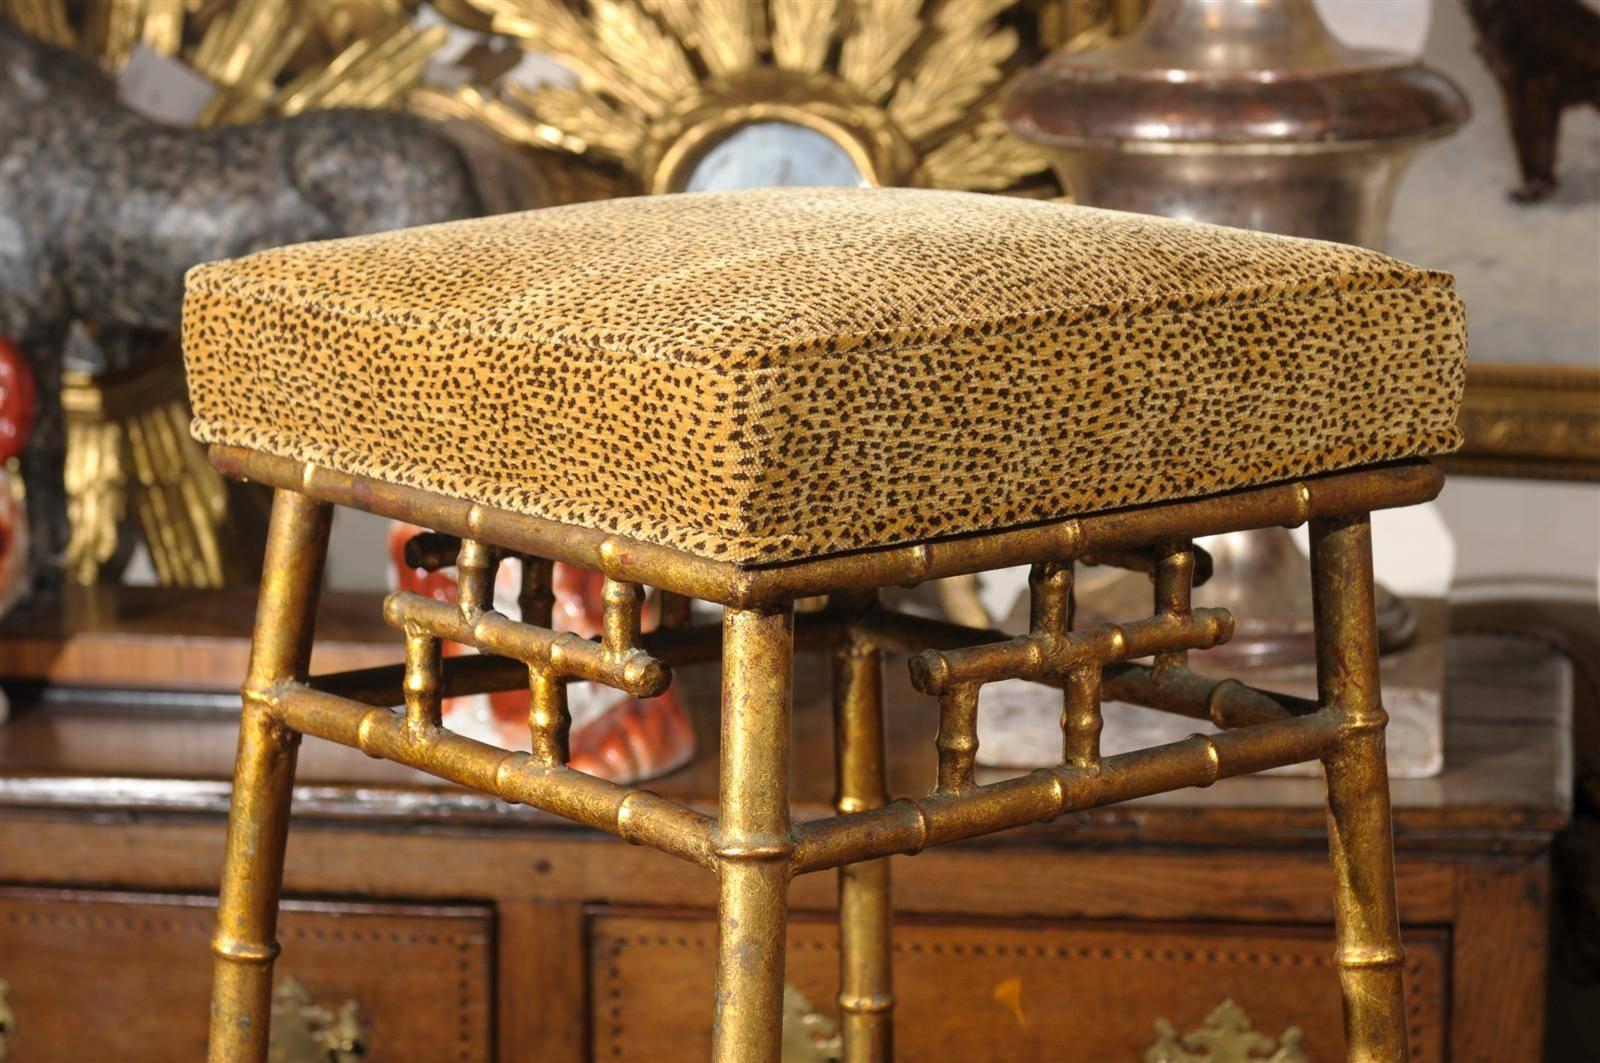 20th Century Italian Gilt Iron Faux-Bamboo Stool with Animal Print Upholstery from the 1950s